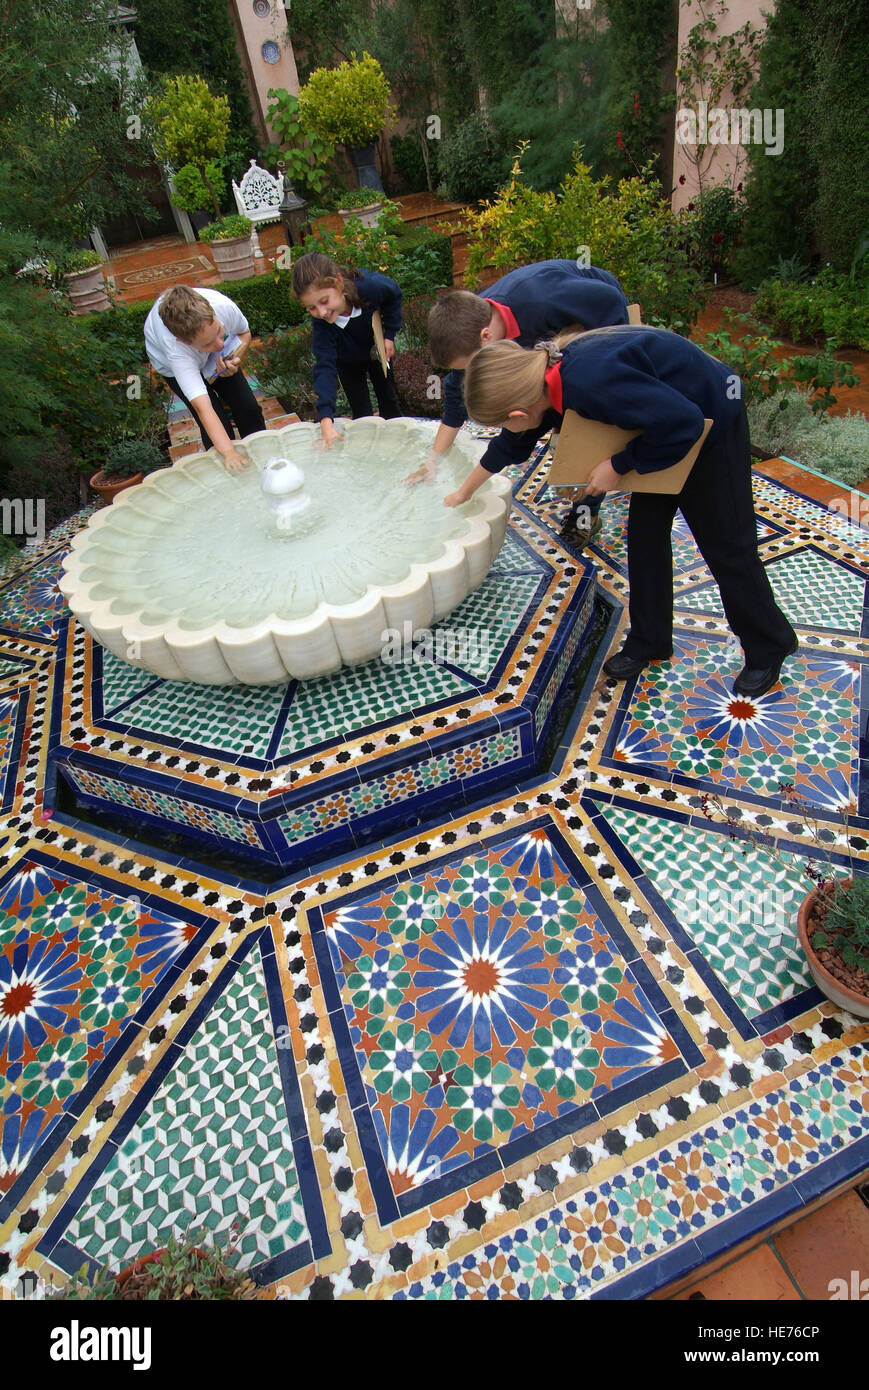 Schoolchildren visiting the Islamic Garden at Highgrove House, which was created by HRH The Prince of Wales. Stock Photo